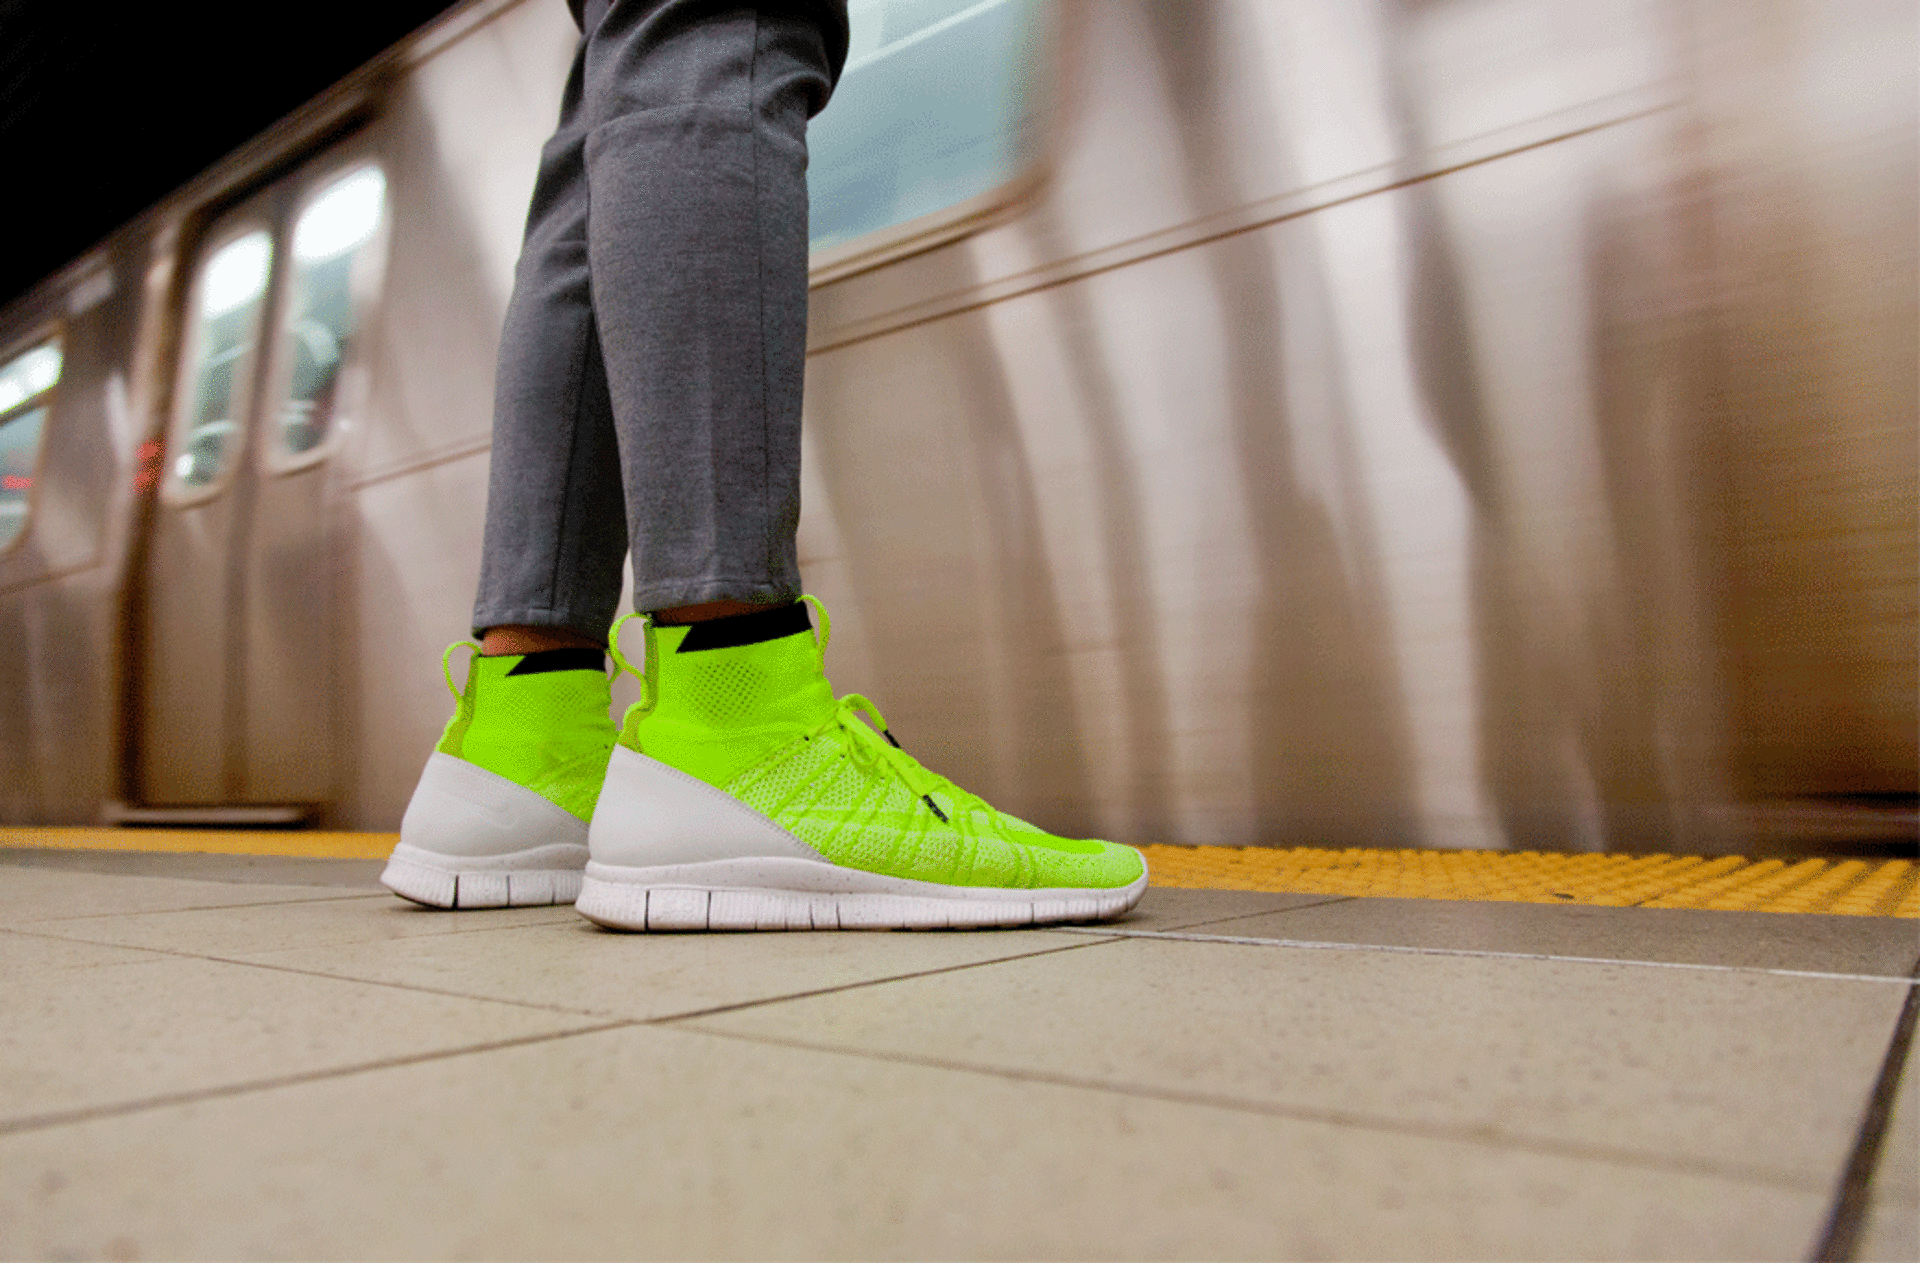 mueble Rebobinar plantador Nike Flyknit Is the Most Stylish and Innovative Sneaker Technology Today |  Complex